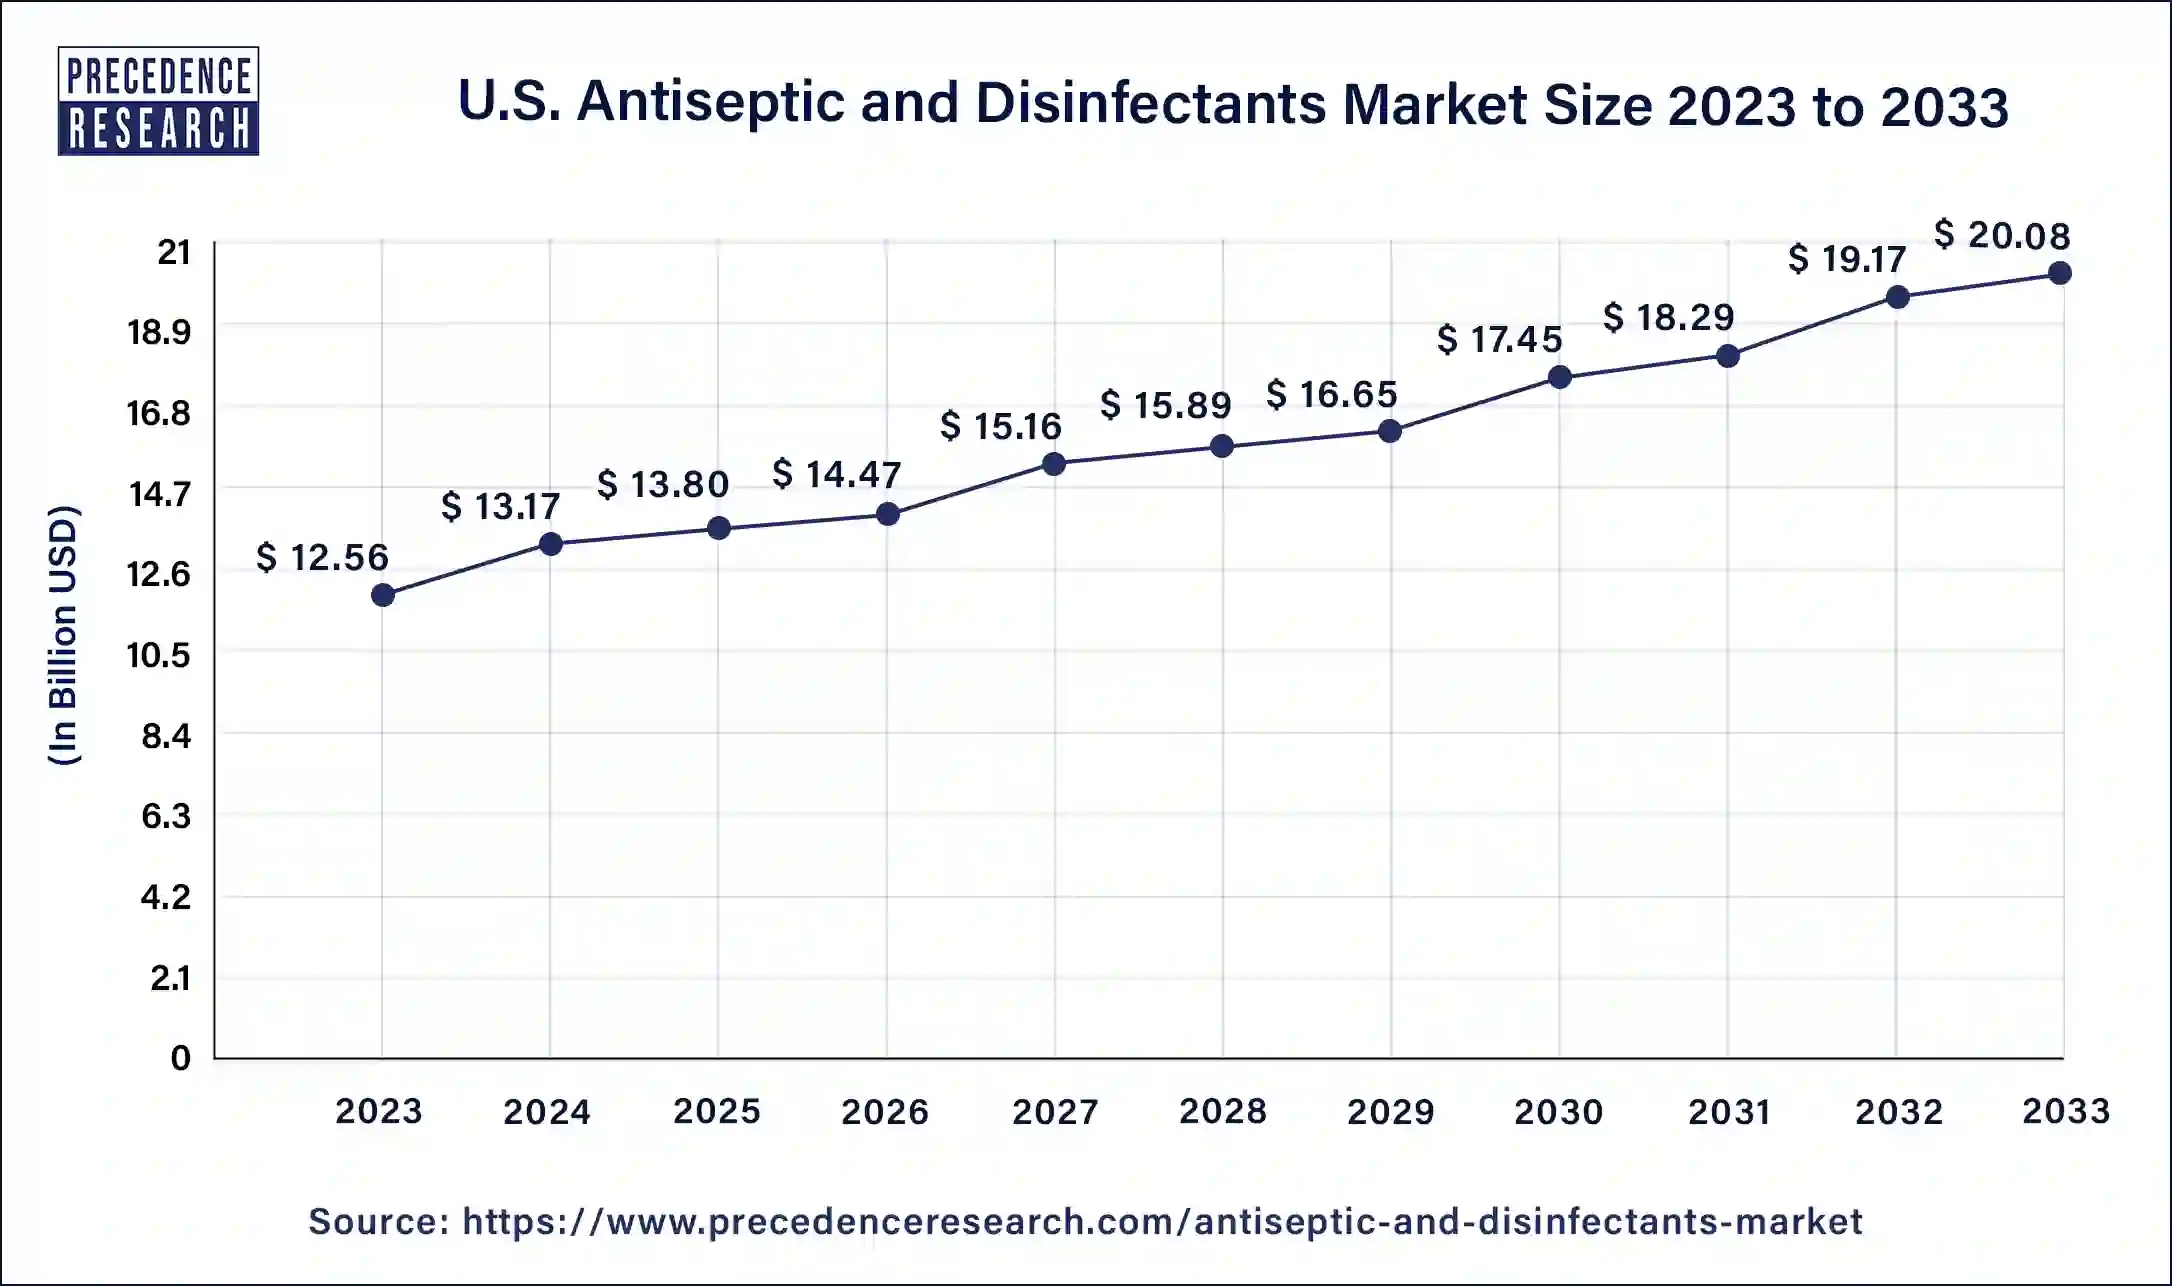 U.S. Antiseptic and Disinfectants Market Size 2024 to 2033